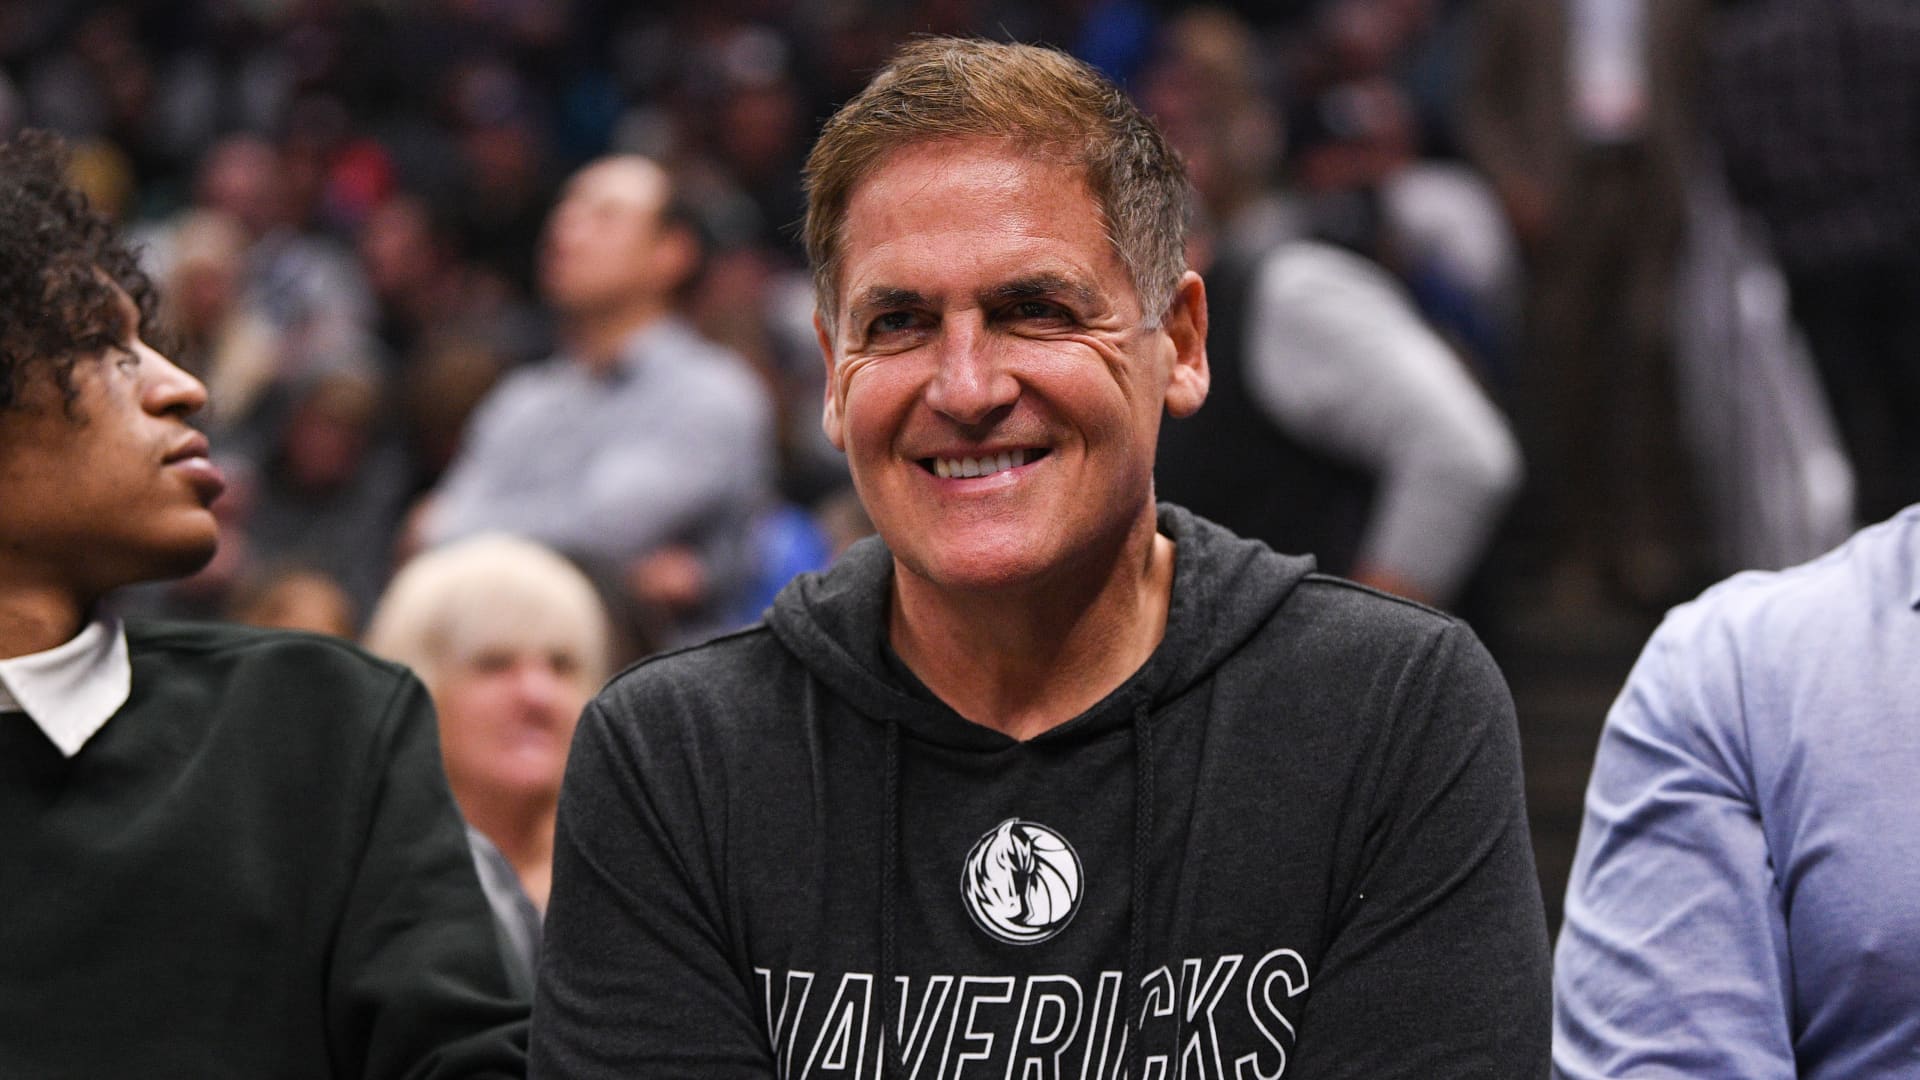 Why is Mark Cuban leaving Shark Tank, the biggest moment in the show?